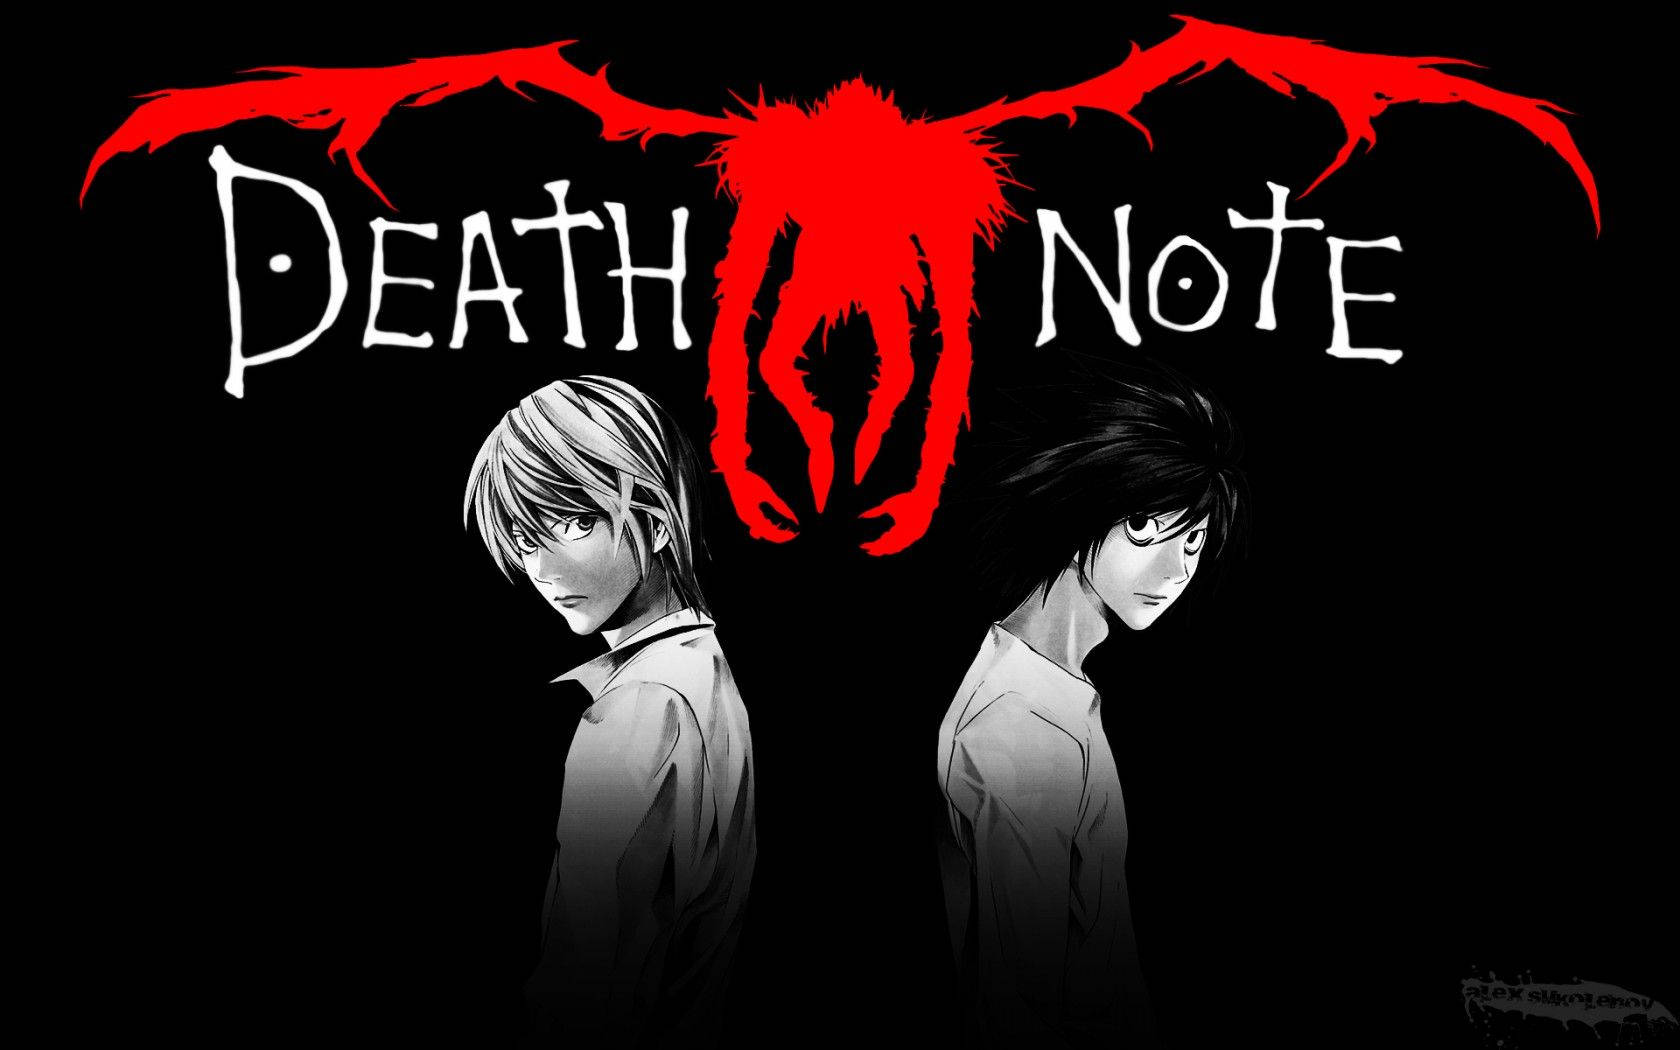 Light Yagami and Ryuk of Death Note fame show off their wits Wallpaper